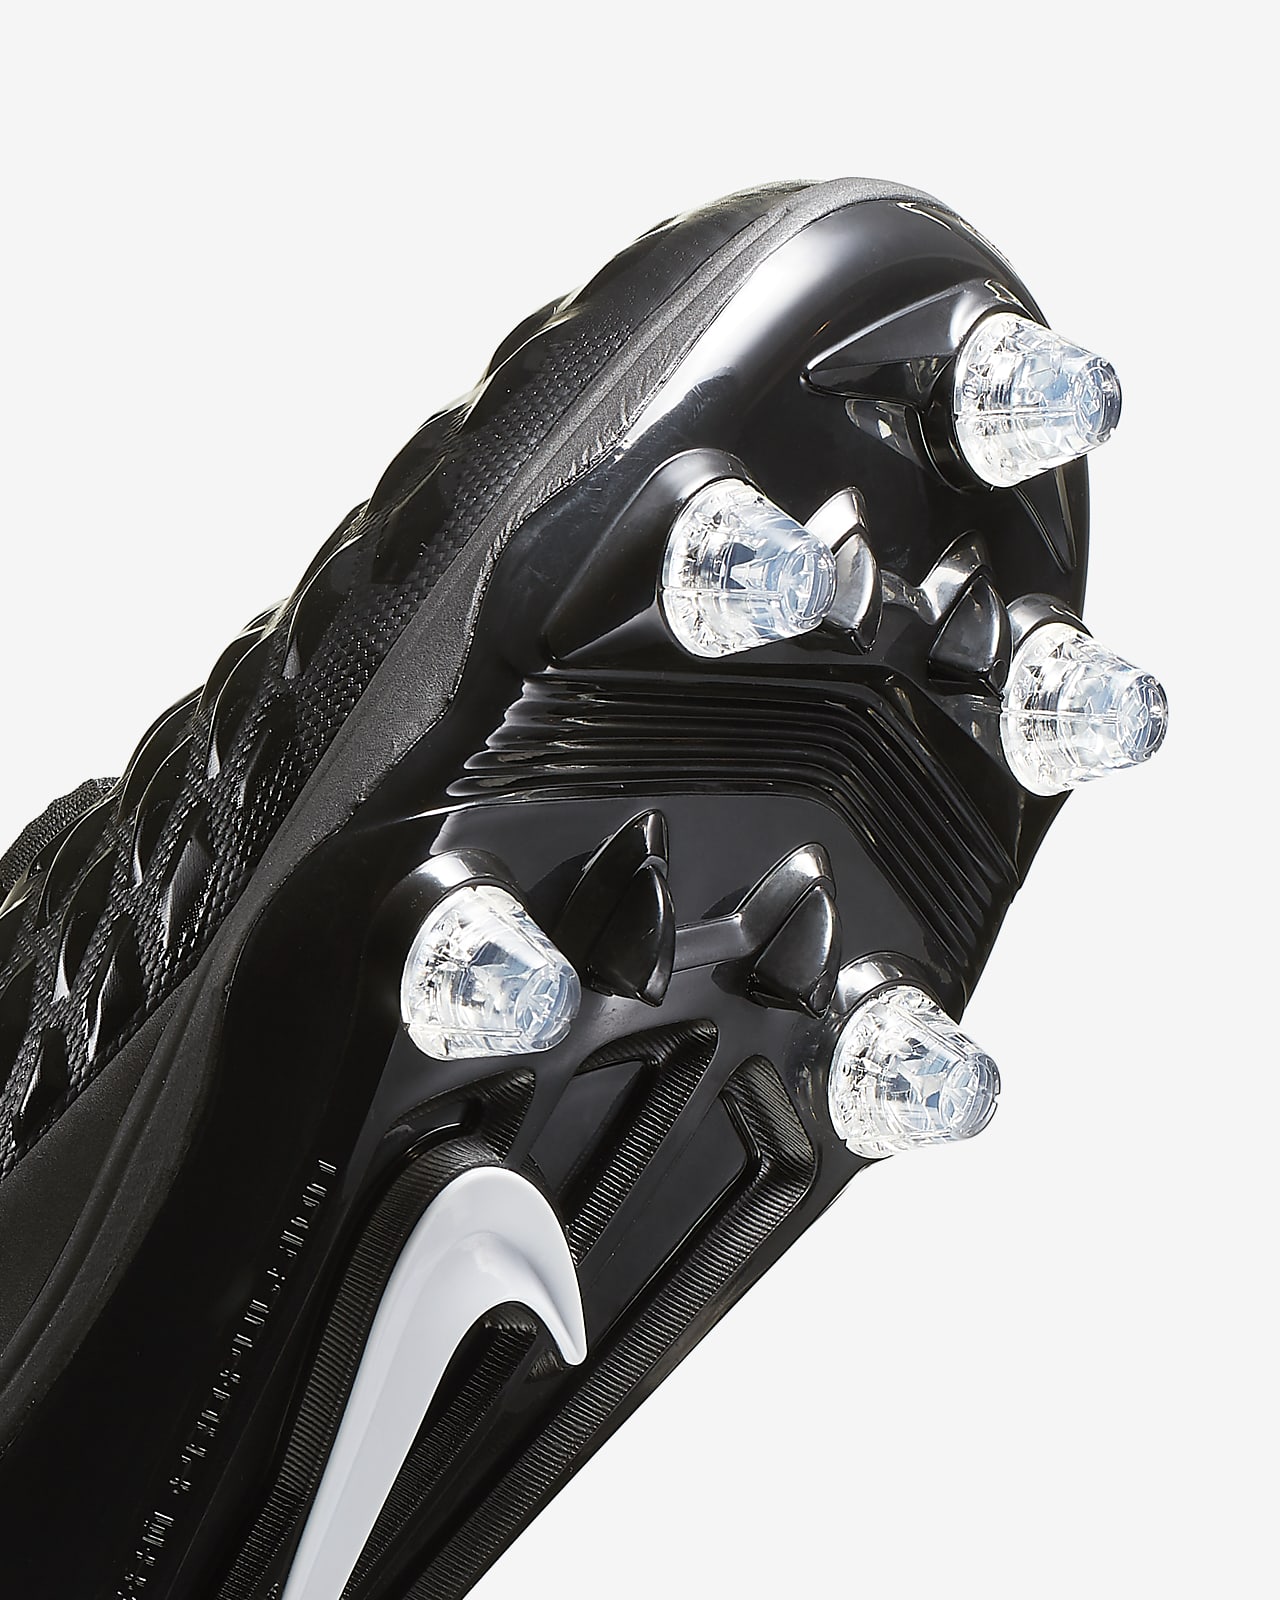 nike men's force savage pro 2 mid football cleats wide